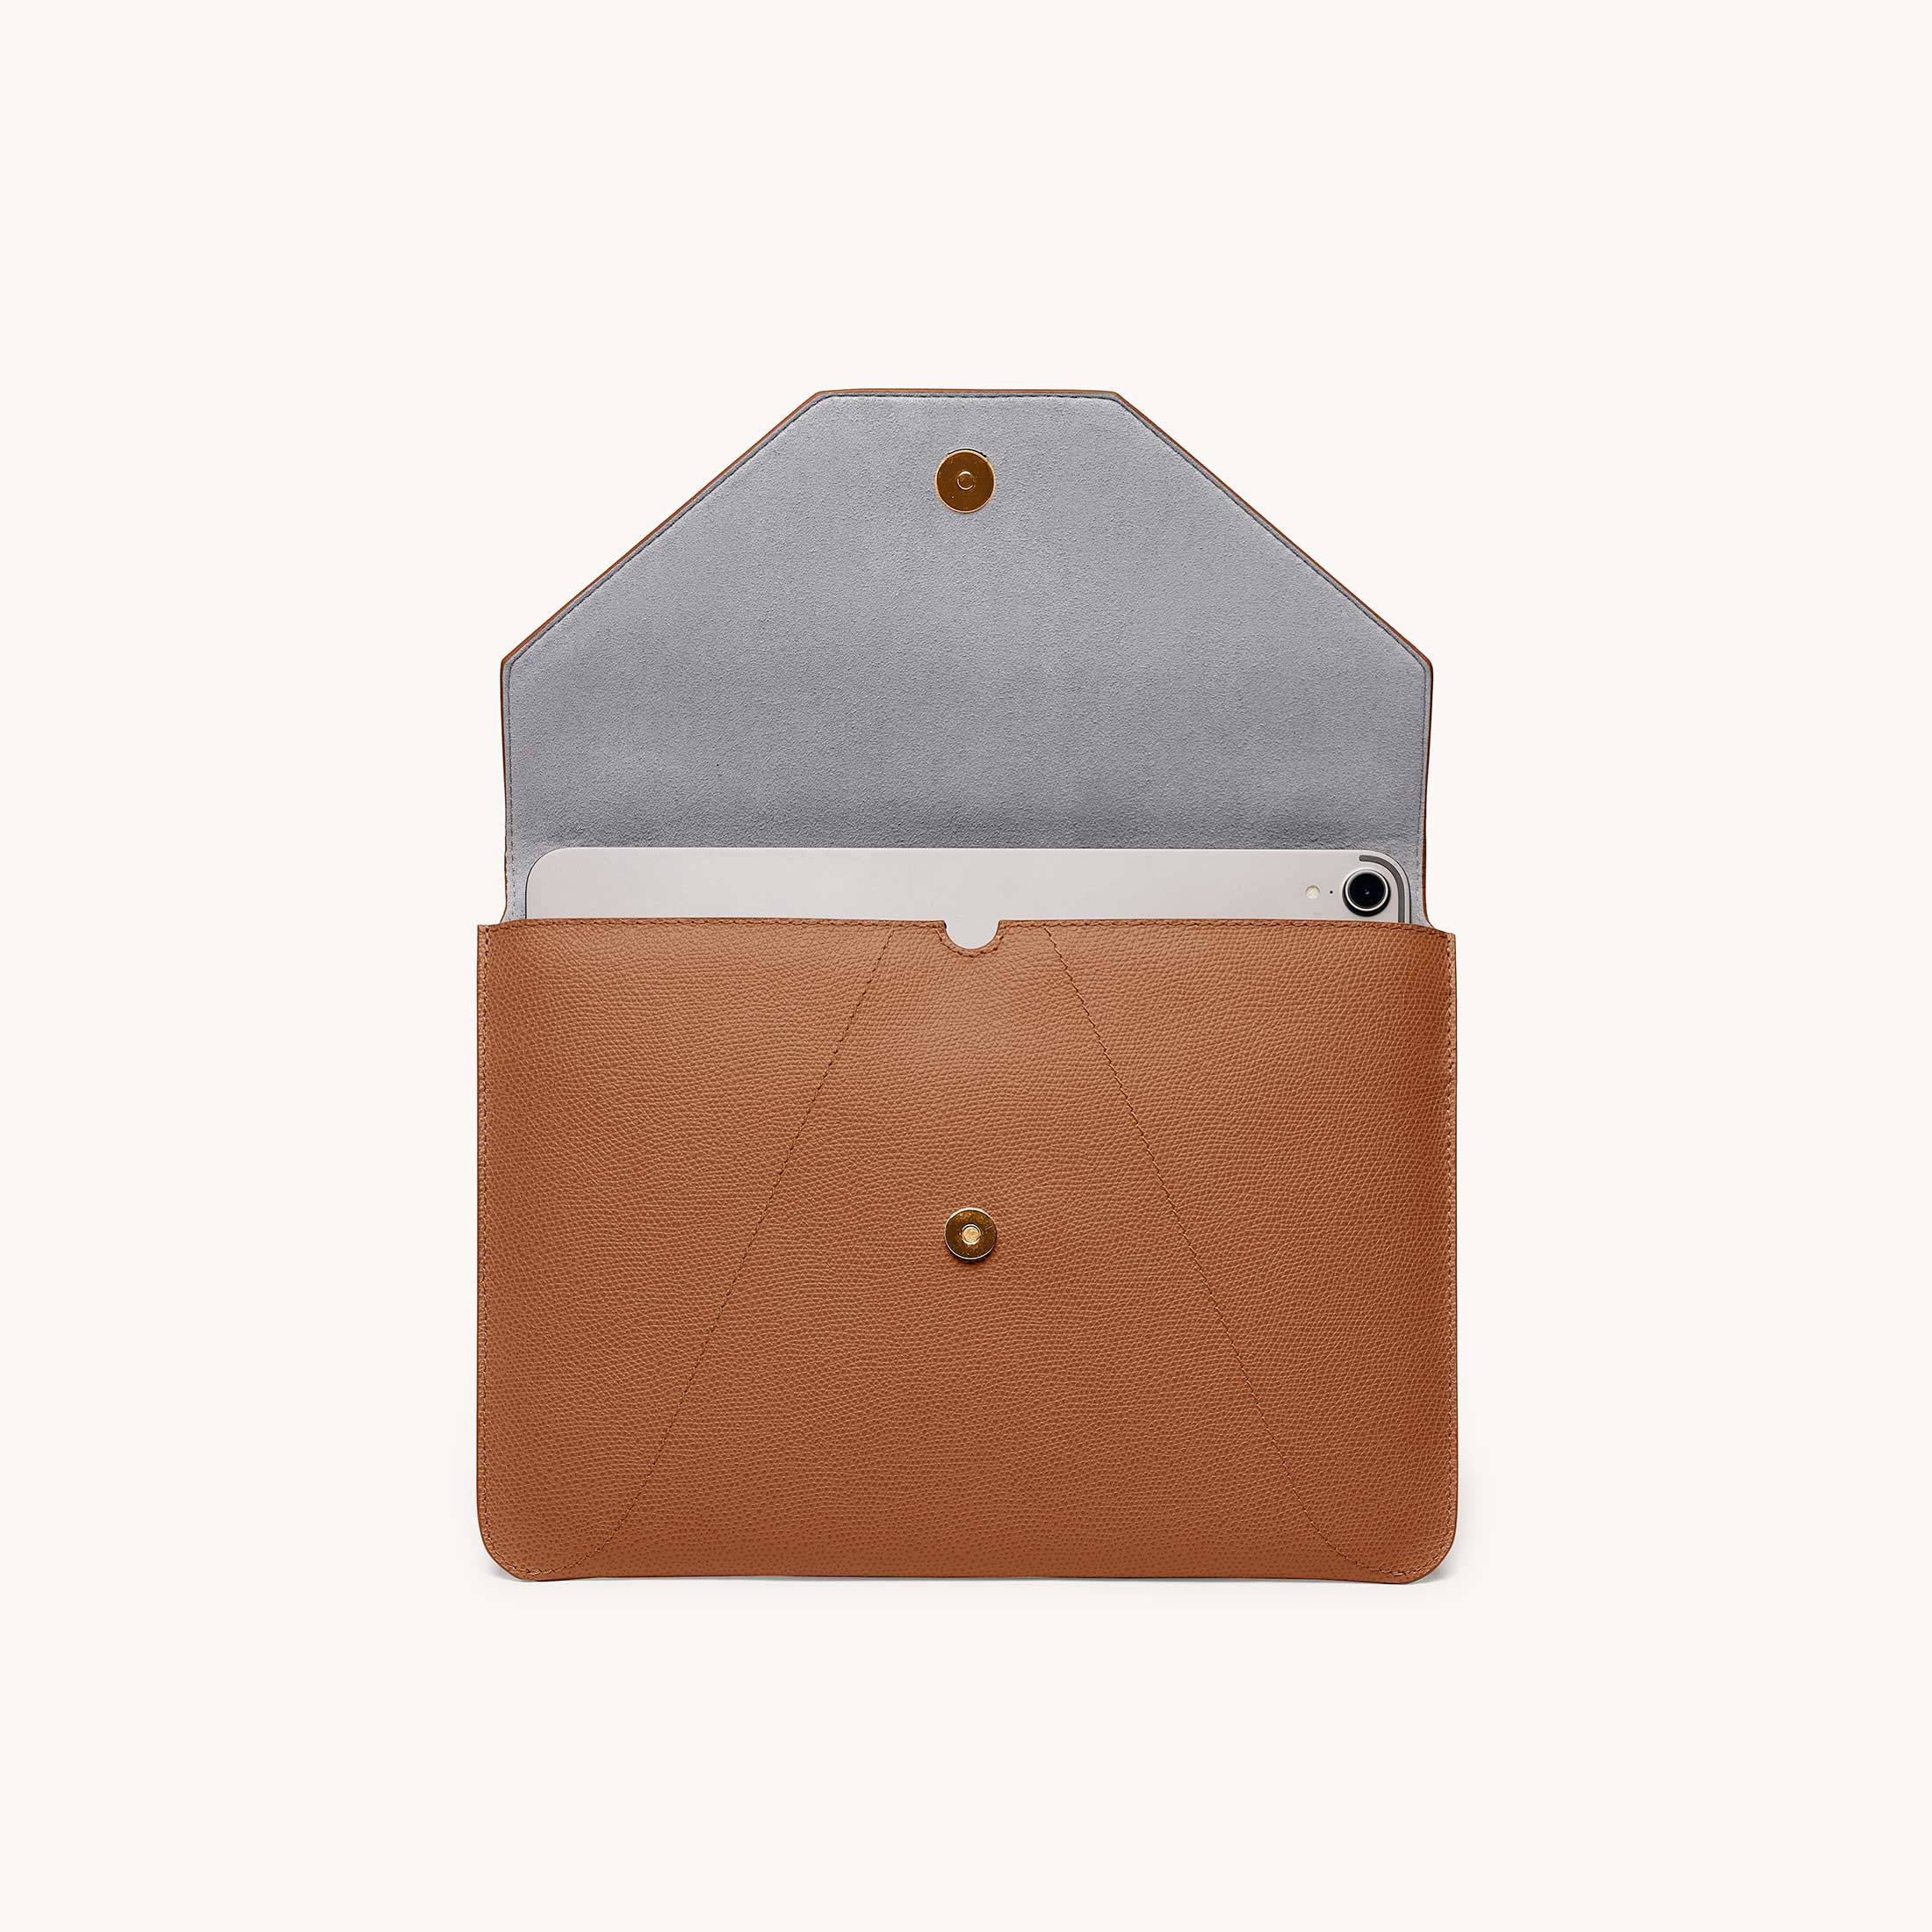 Mini envelope sleeve in chestnut front view with flap open.